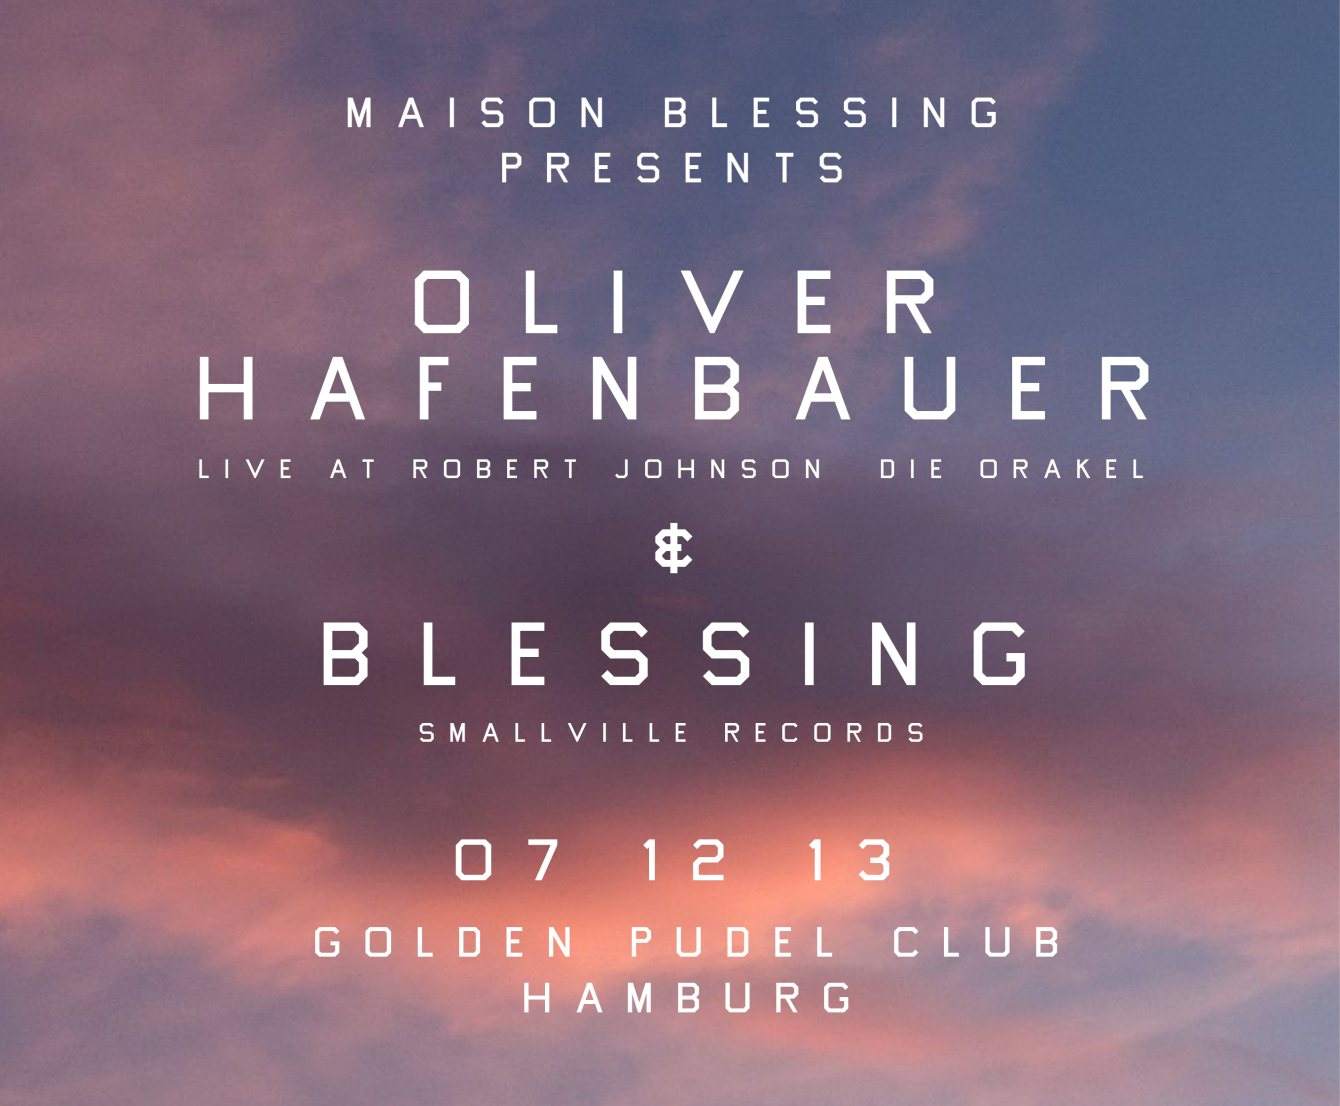 Maison Blessing presents Oliver Hafenbauer and Blessing - Página frontal